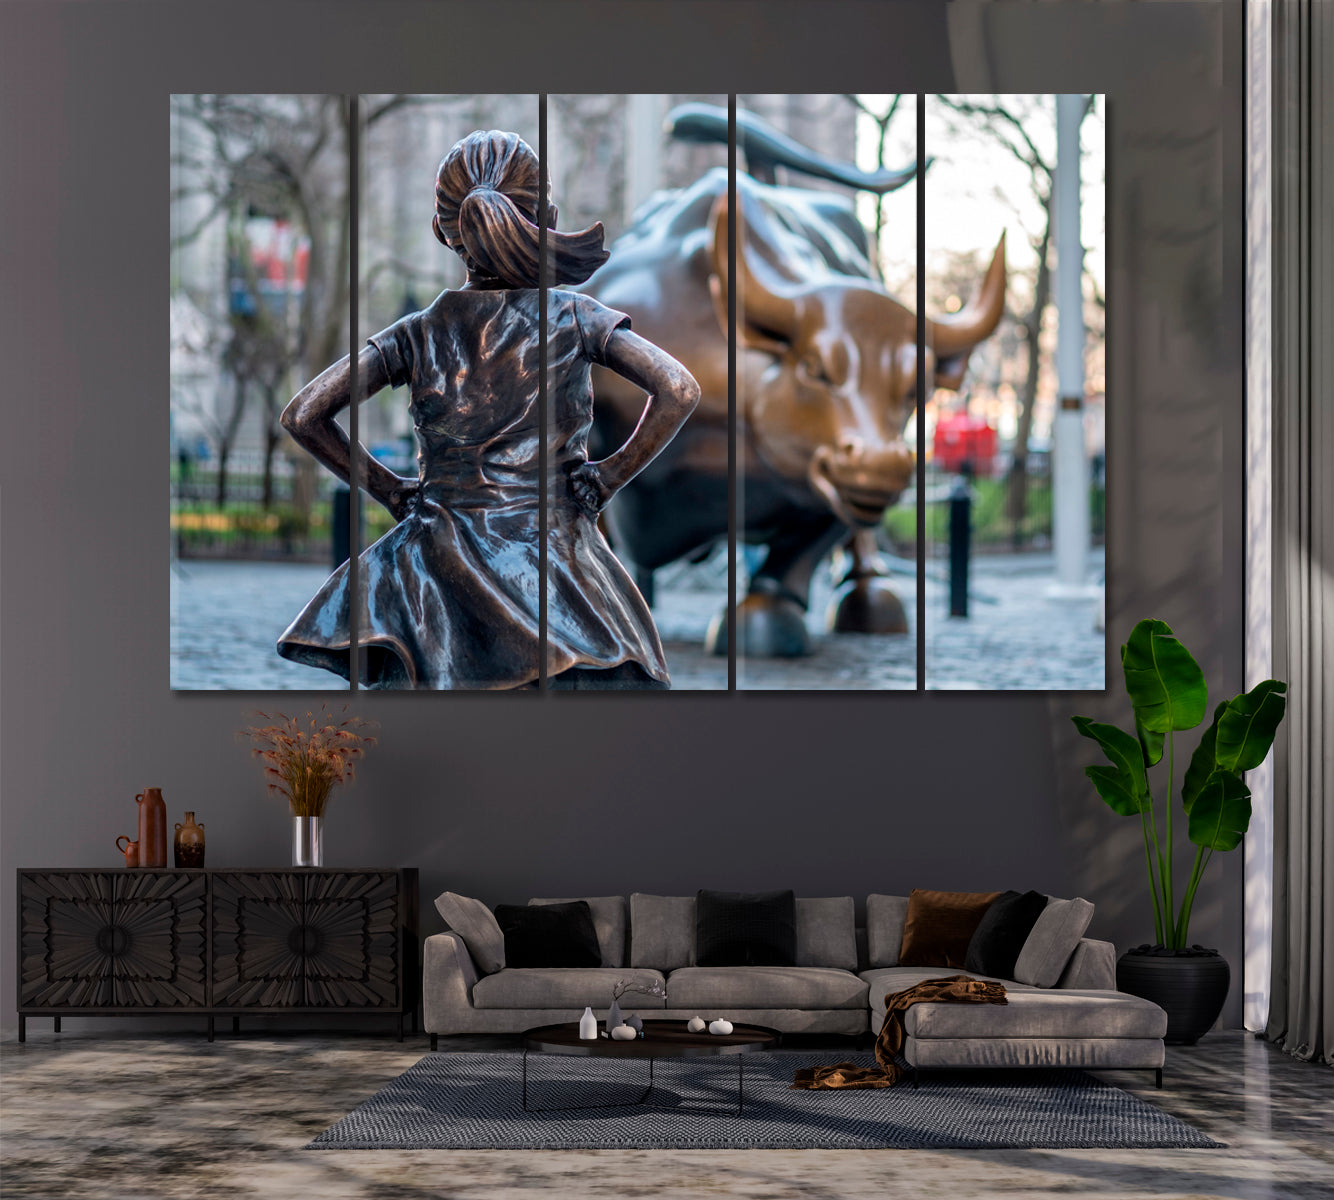 New York Wall Street Charging Bull Canvas Print ArtLexy 5 Panels 36"x24" inches 